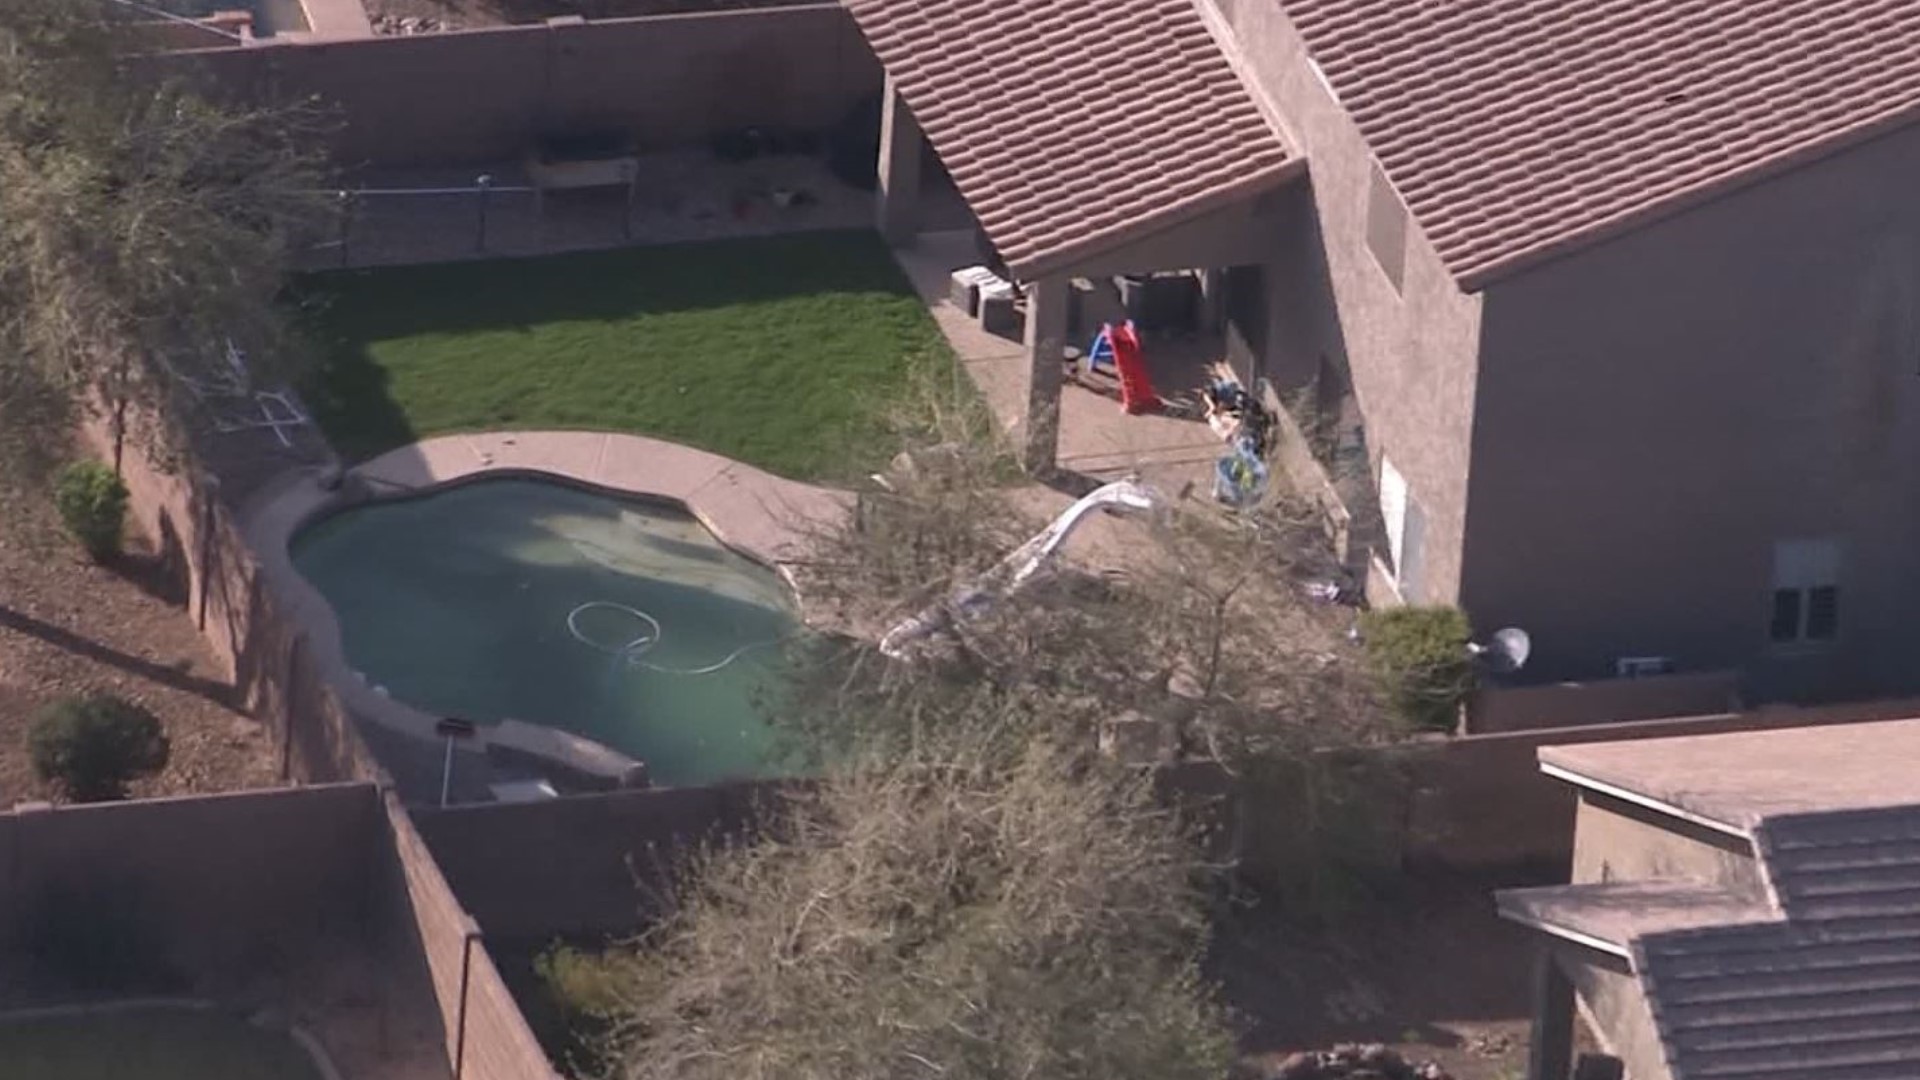 The 2-year-old girl died Thursday morning after she was pulled out of a pool the day before.